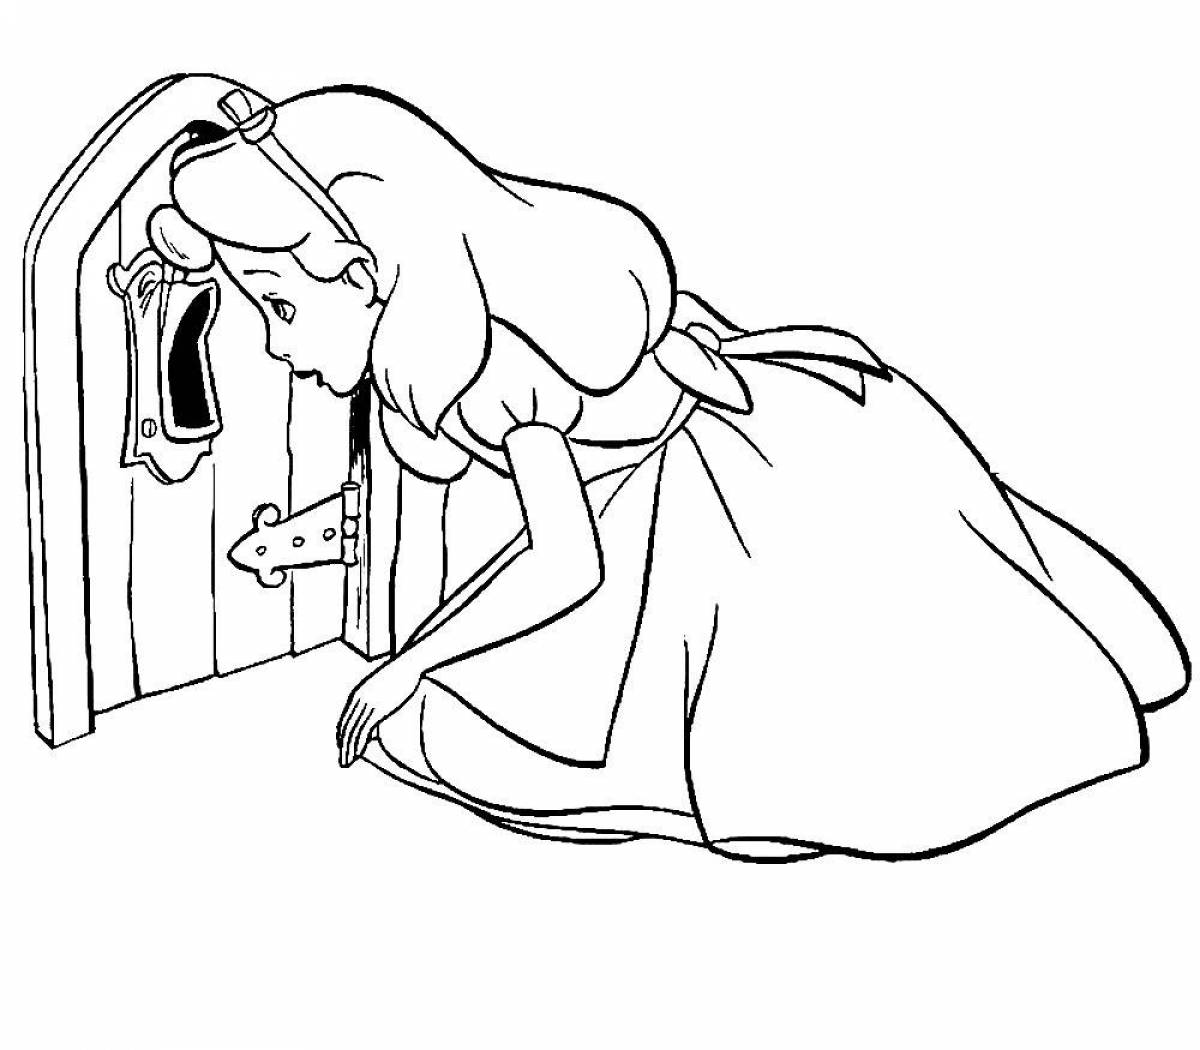 Brilliant alice find coloring pages